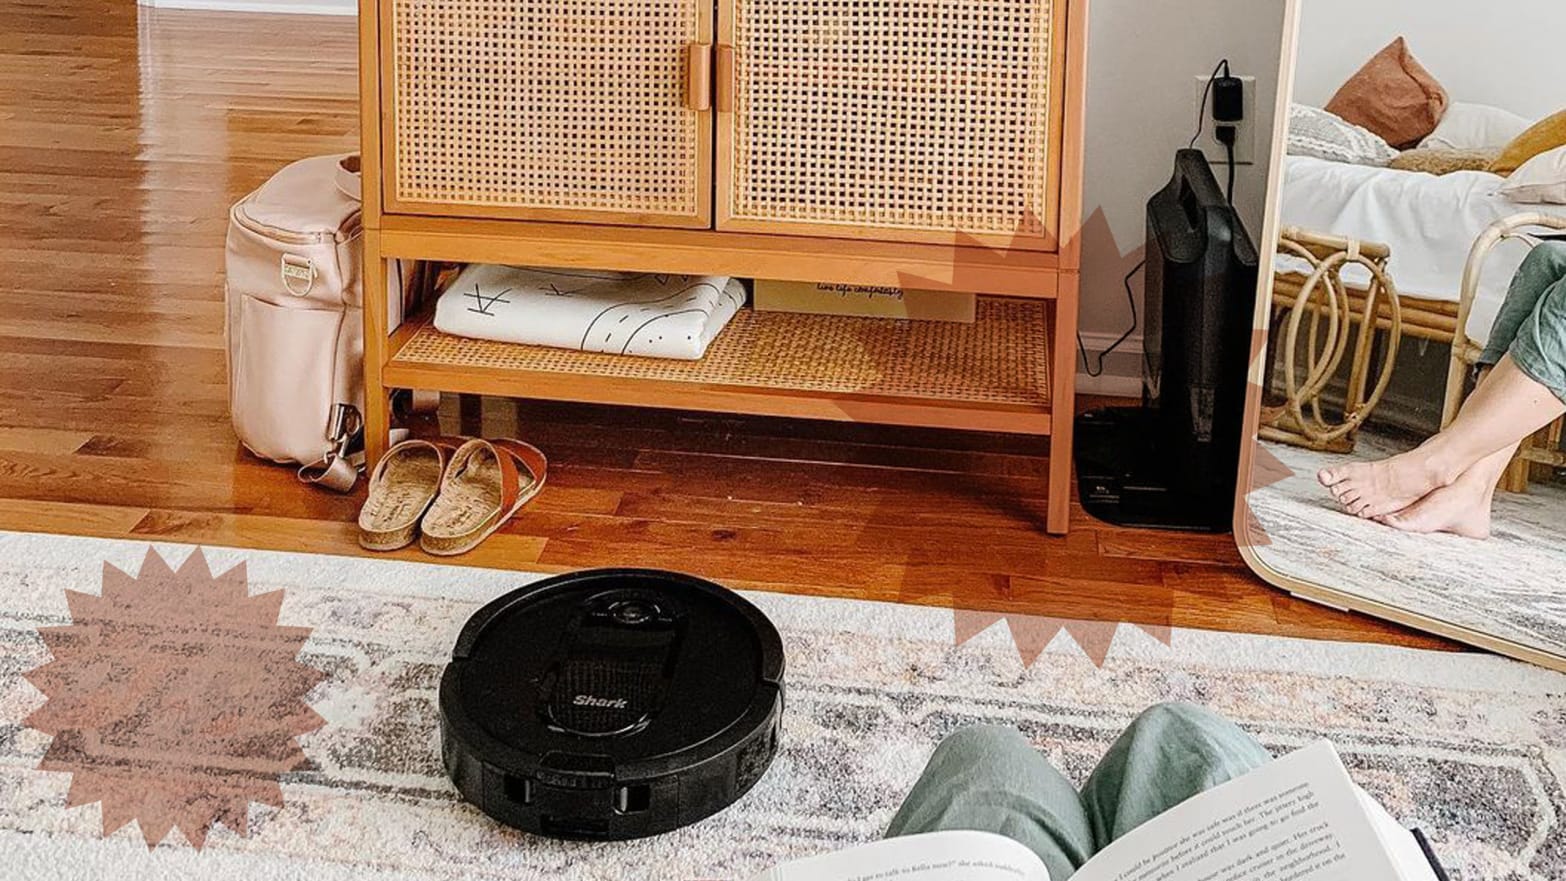 Do you Roomba? or other robot vacuums? Which is the best? Roomba Tips? 